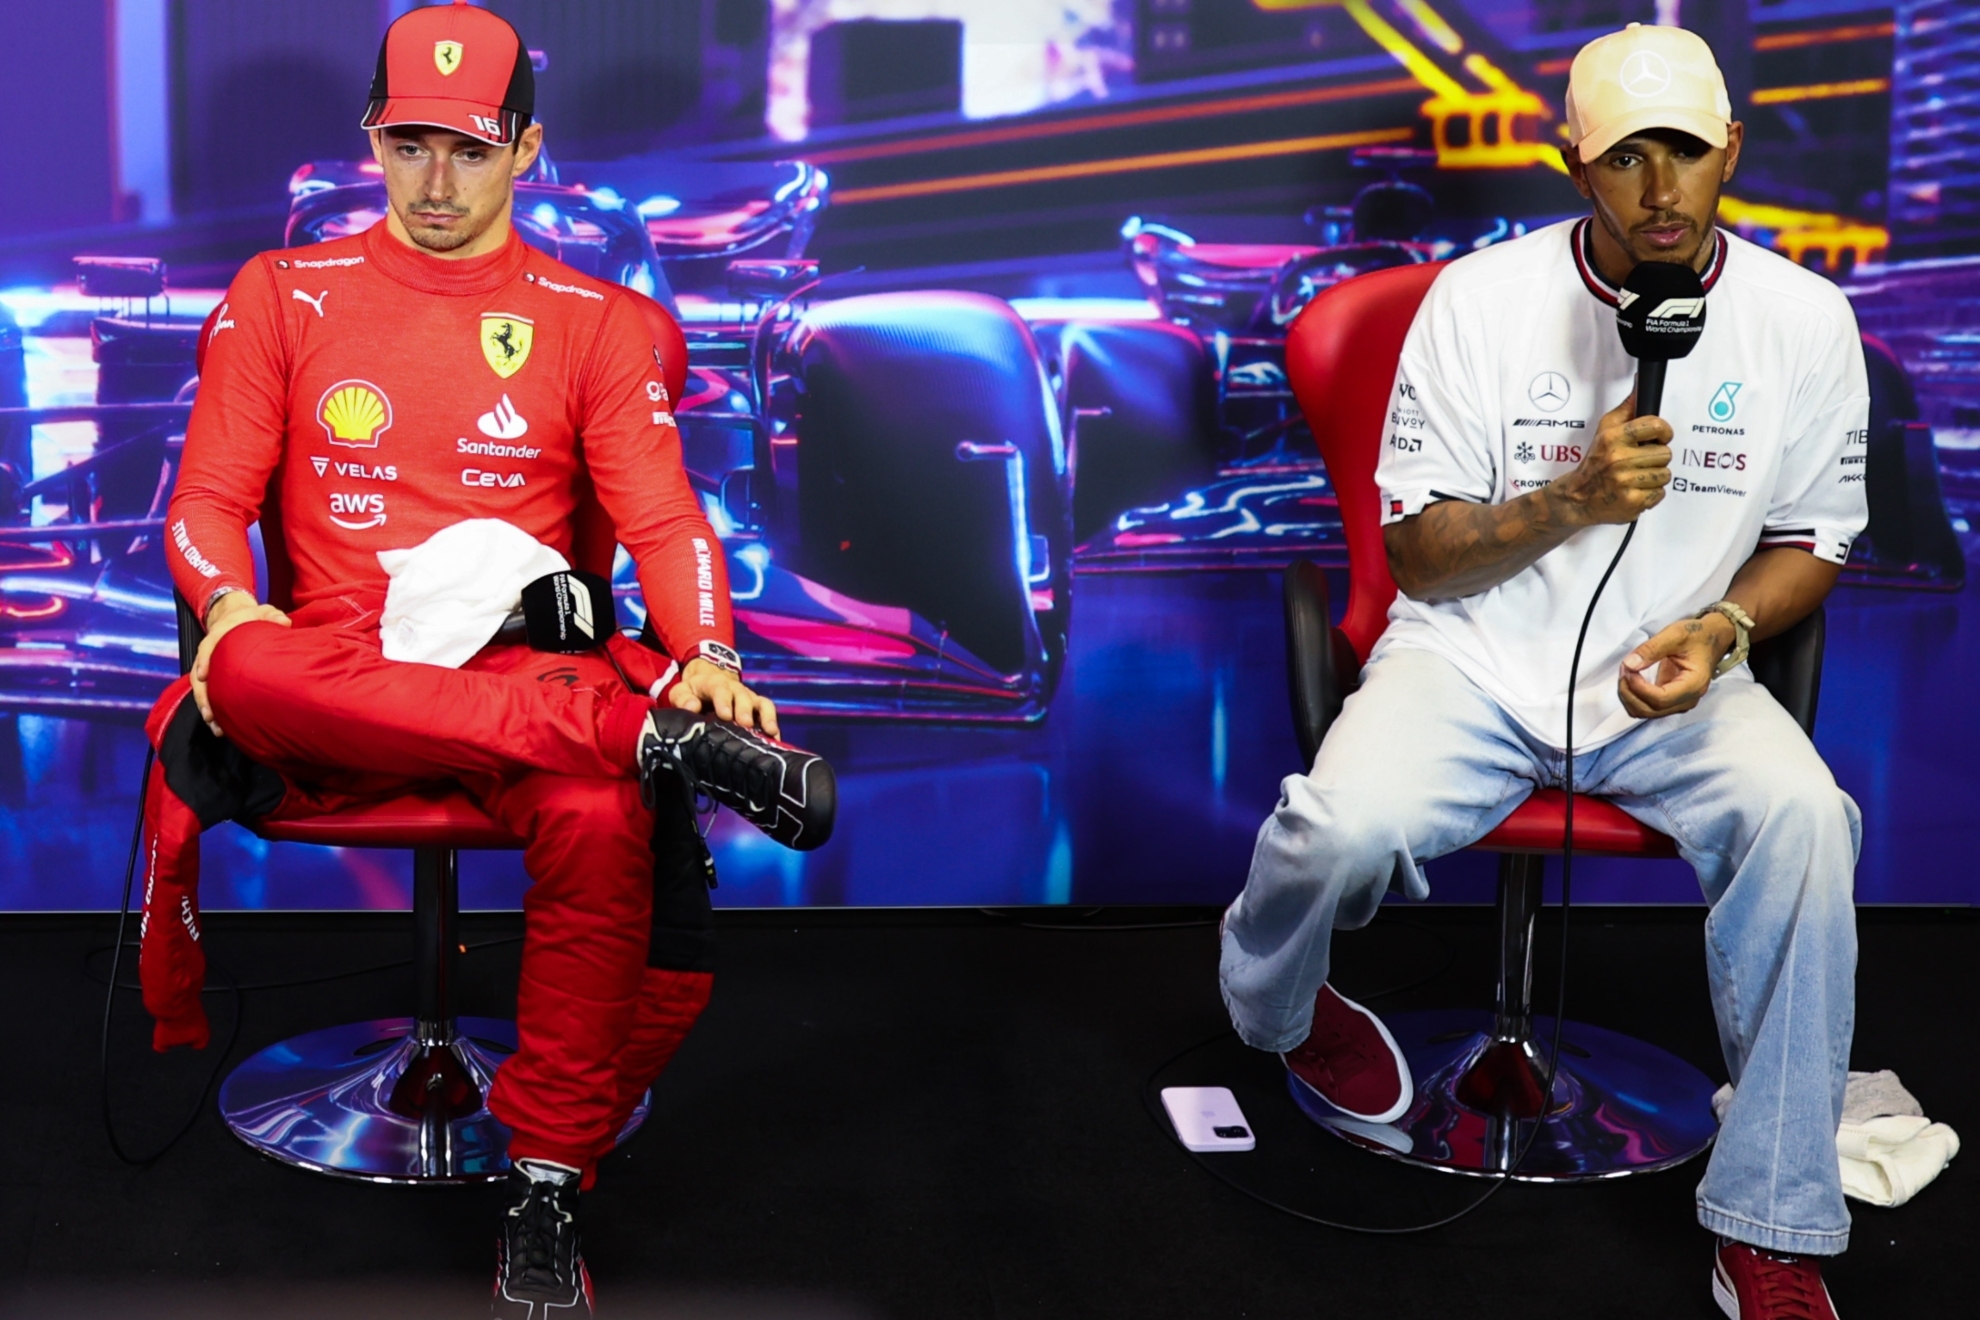 Hamilton offers himself to Ferrari and says yes to fulfill his dream